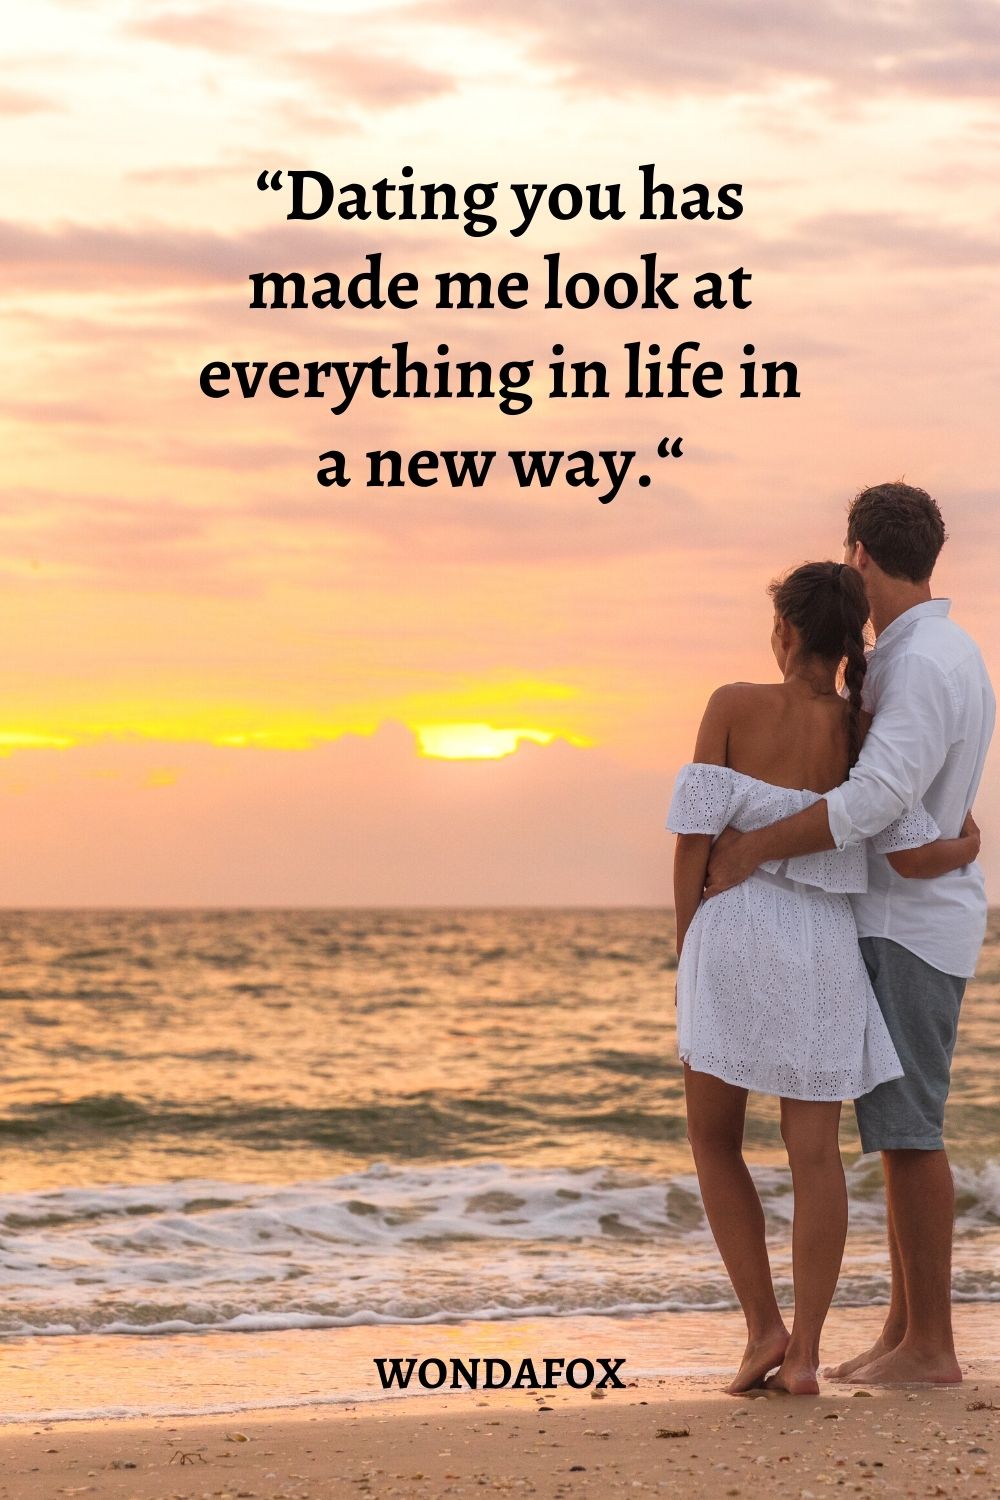 “Dating you has made me look at everything in life in a new way.“